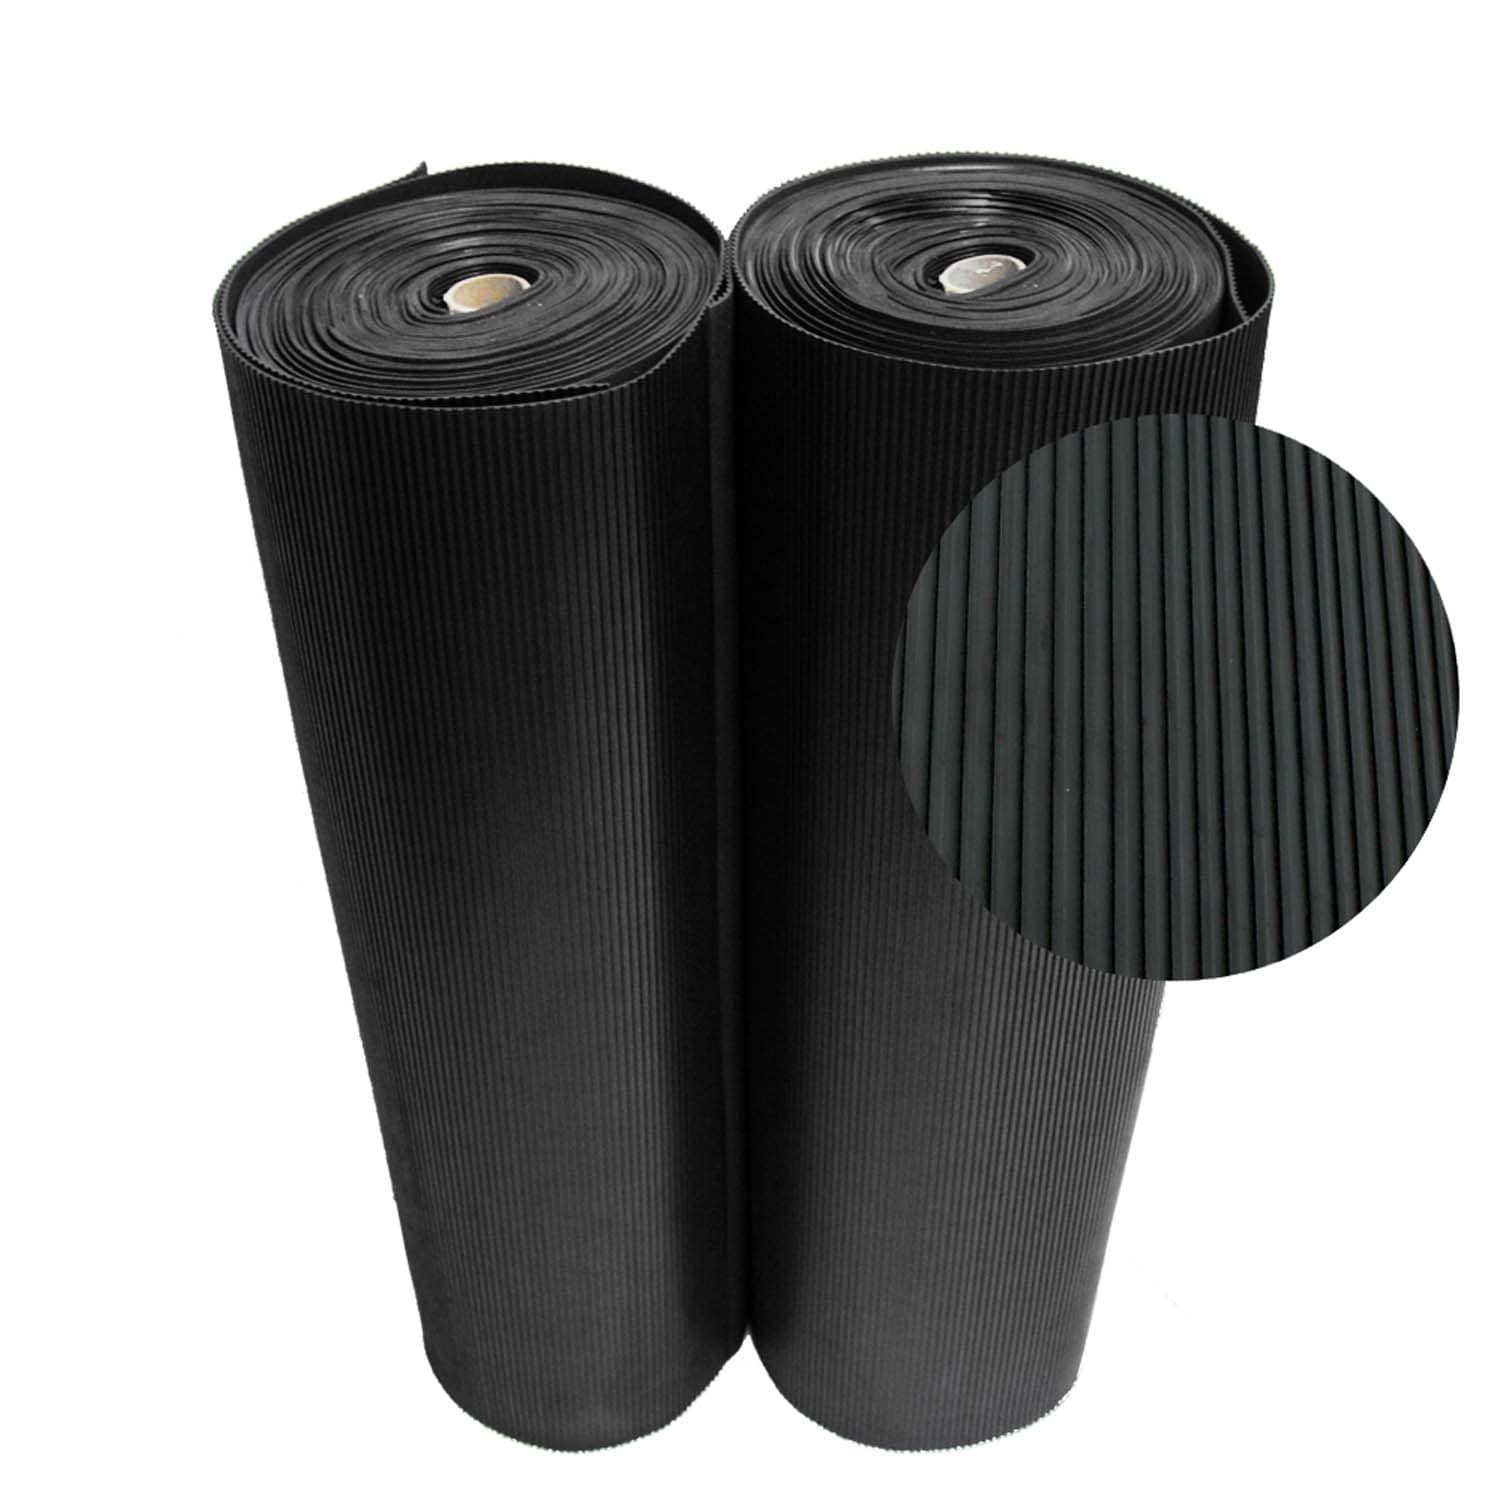 Rubber-Cal Tuff-n-Lastic Rubber Runner Mat - 1/8 in x 48 in x 9 ft Rolled Rubber Flooring - Black